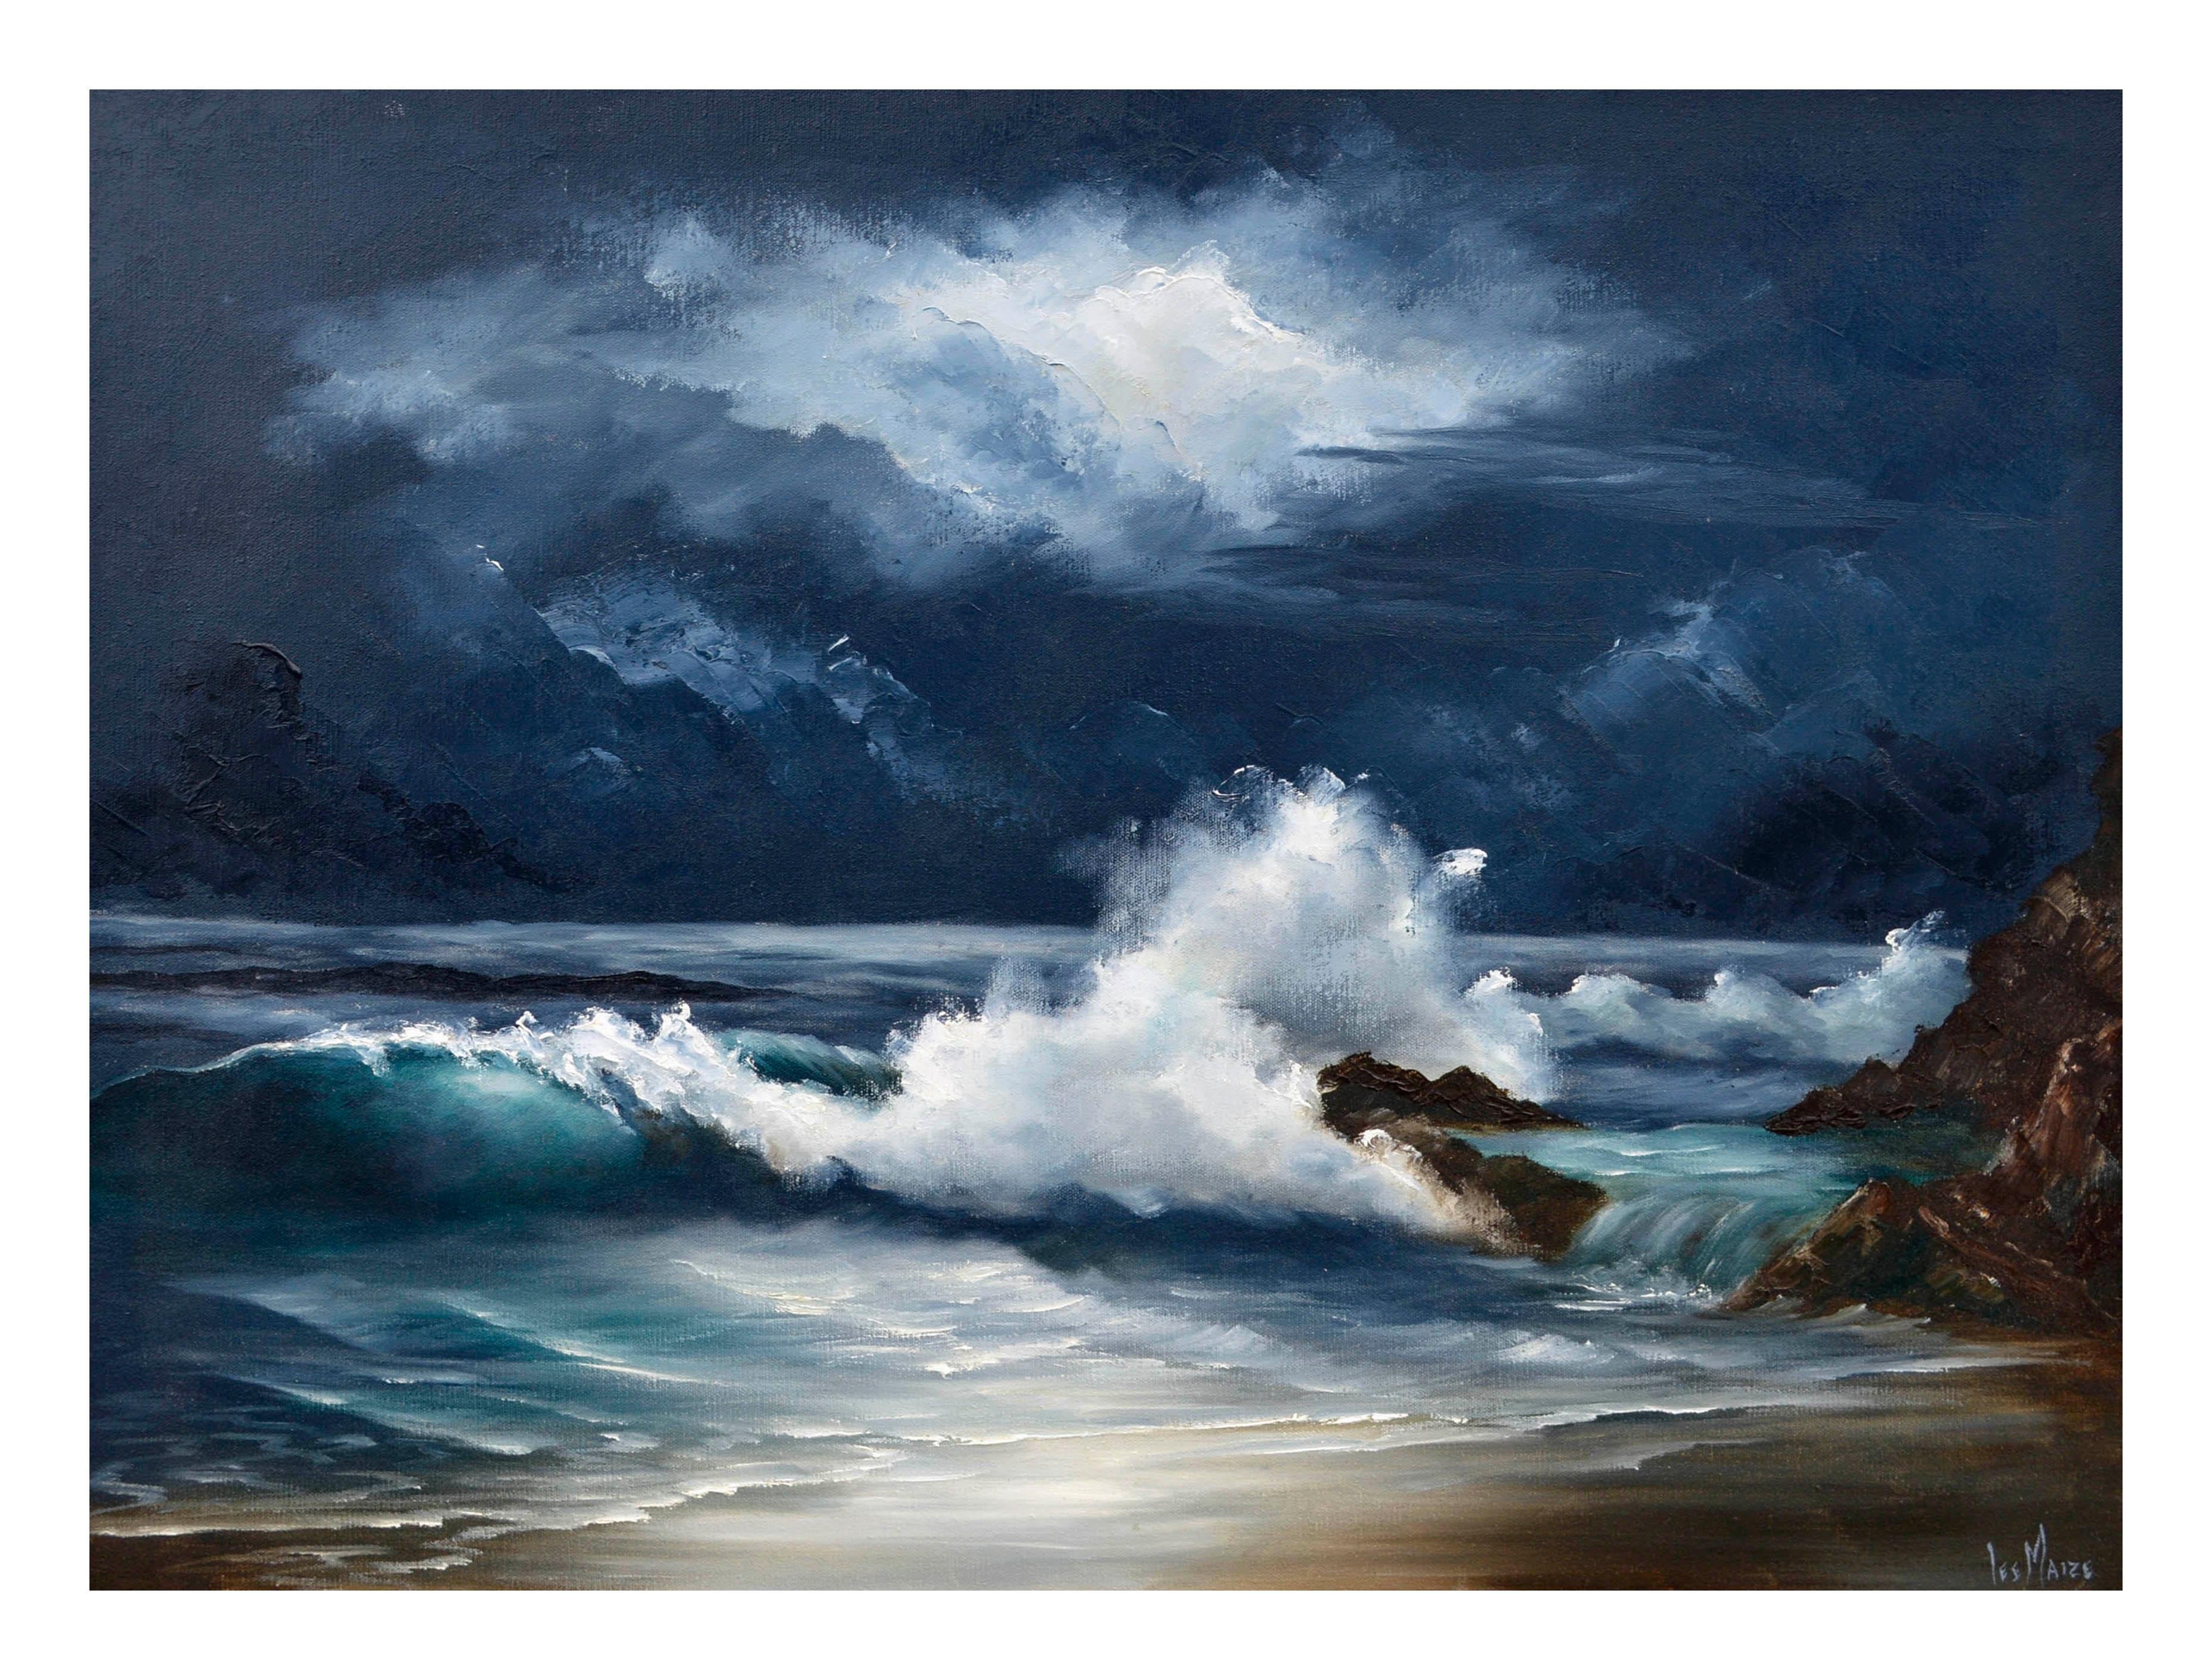 Moonlit Waves - Nocturnal Seascape  - Painting by Lee Maize